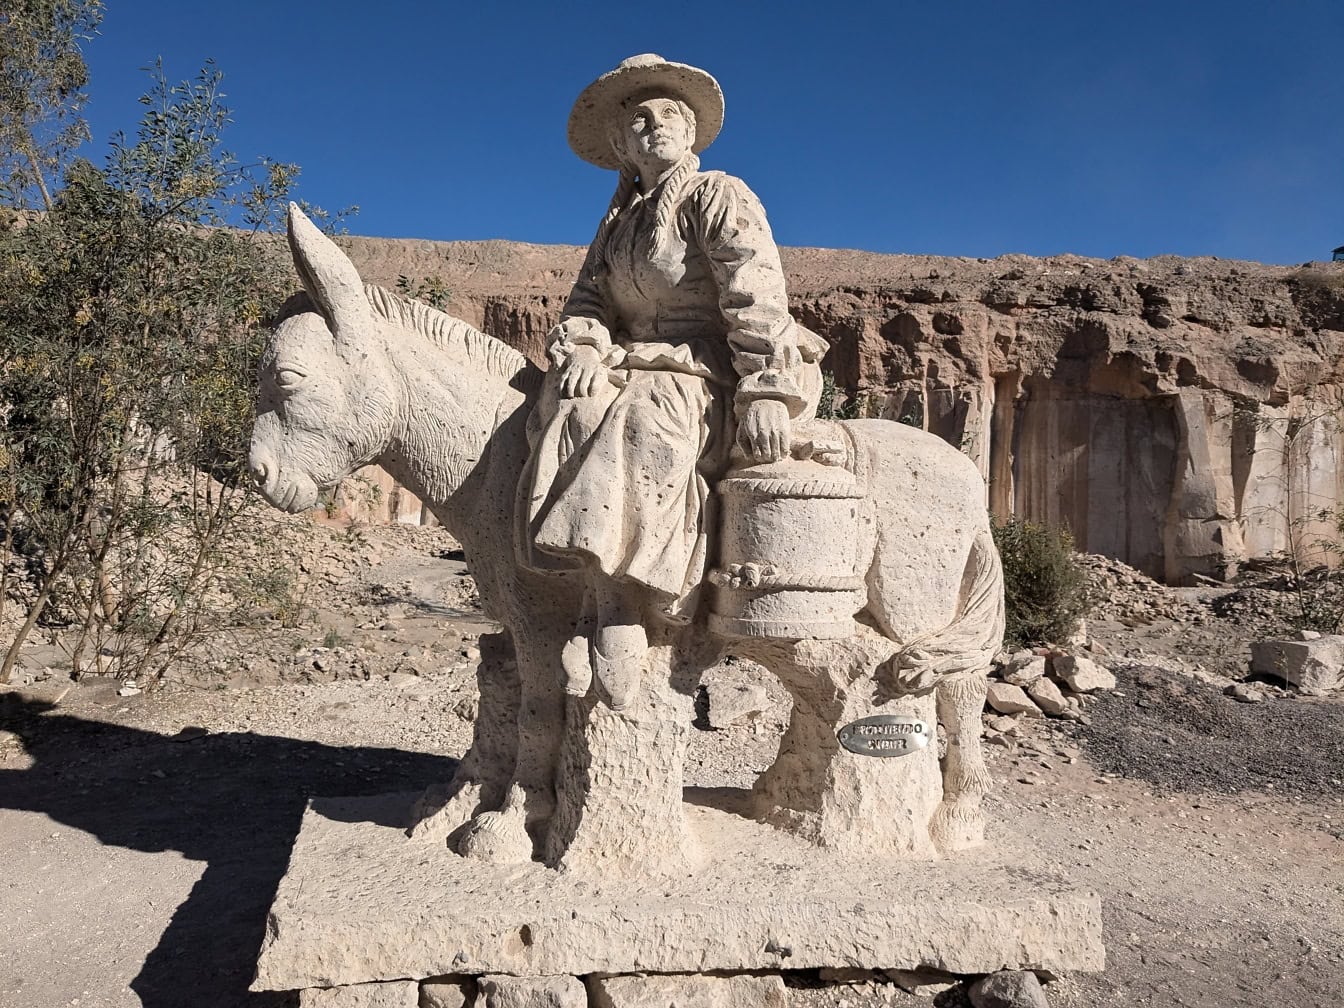 Statue of a man riding a donkey at the Sillar route near Culebrillas canyon in Peru